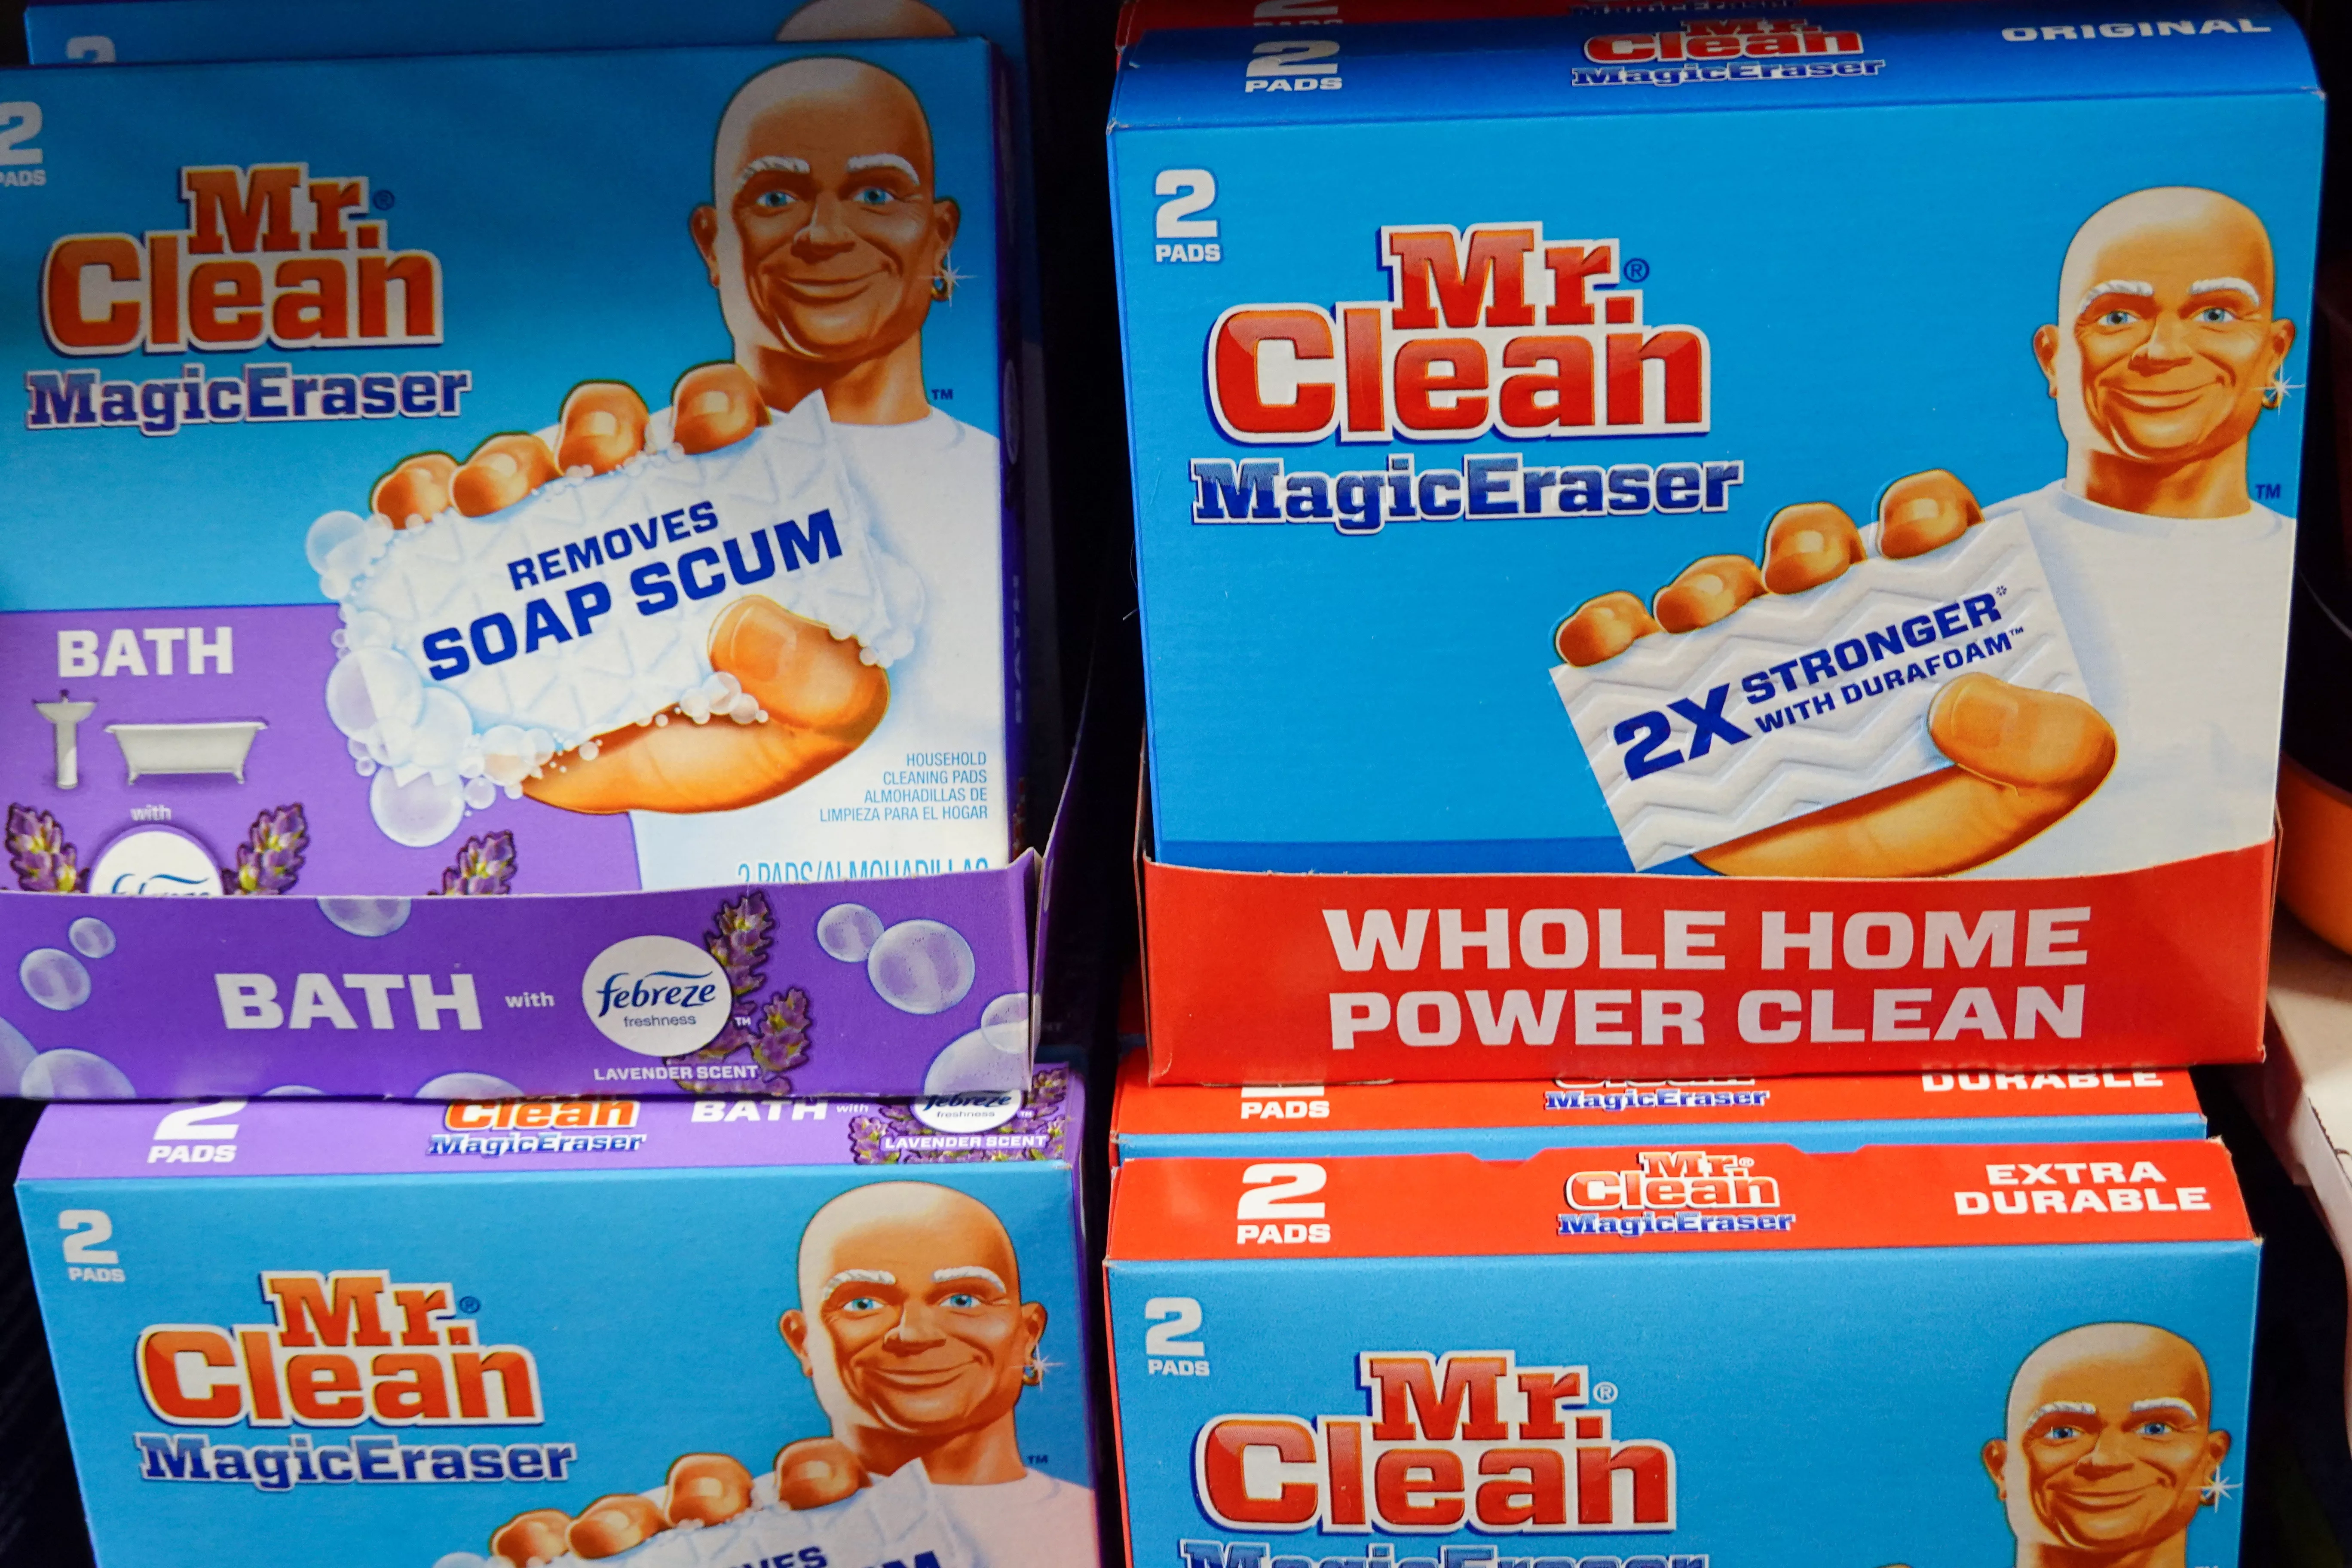 mr-clean-magic-eraser-a-brand-owned-by-procter-gamble-is-seen-for-sale-in-a-store-in-manhattan-new-york-city